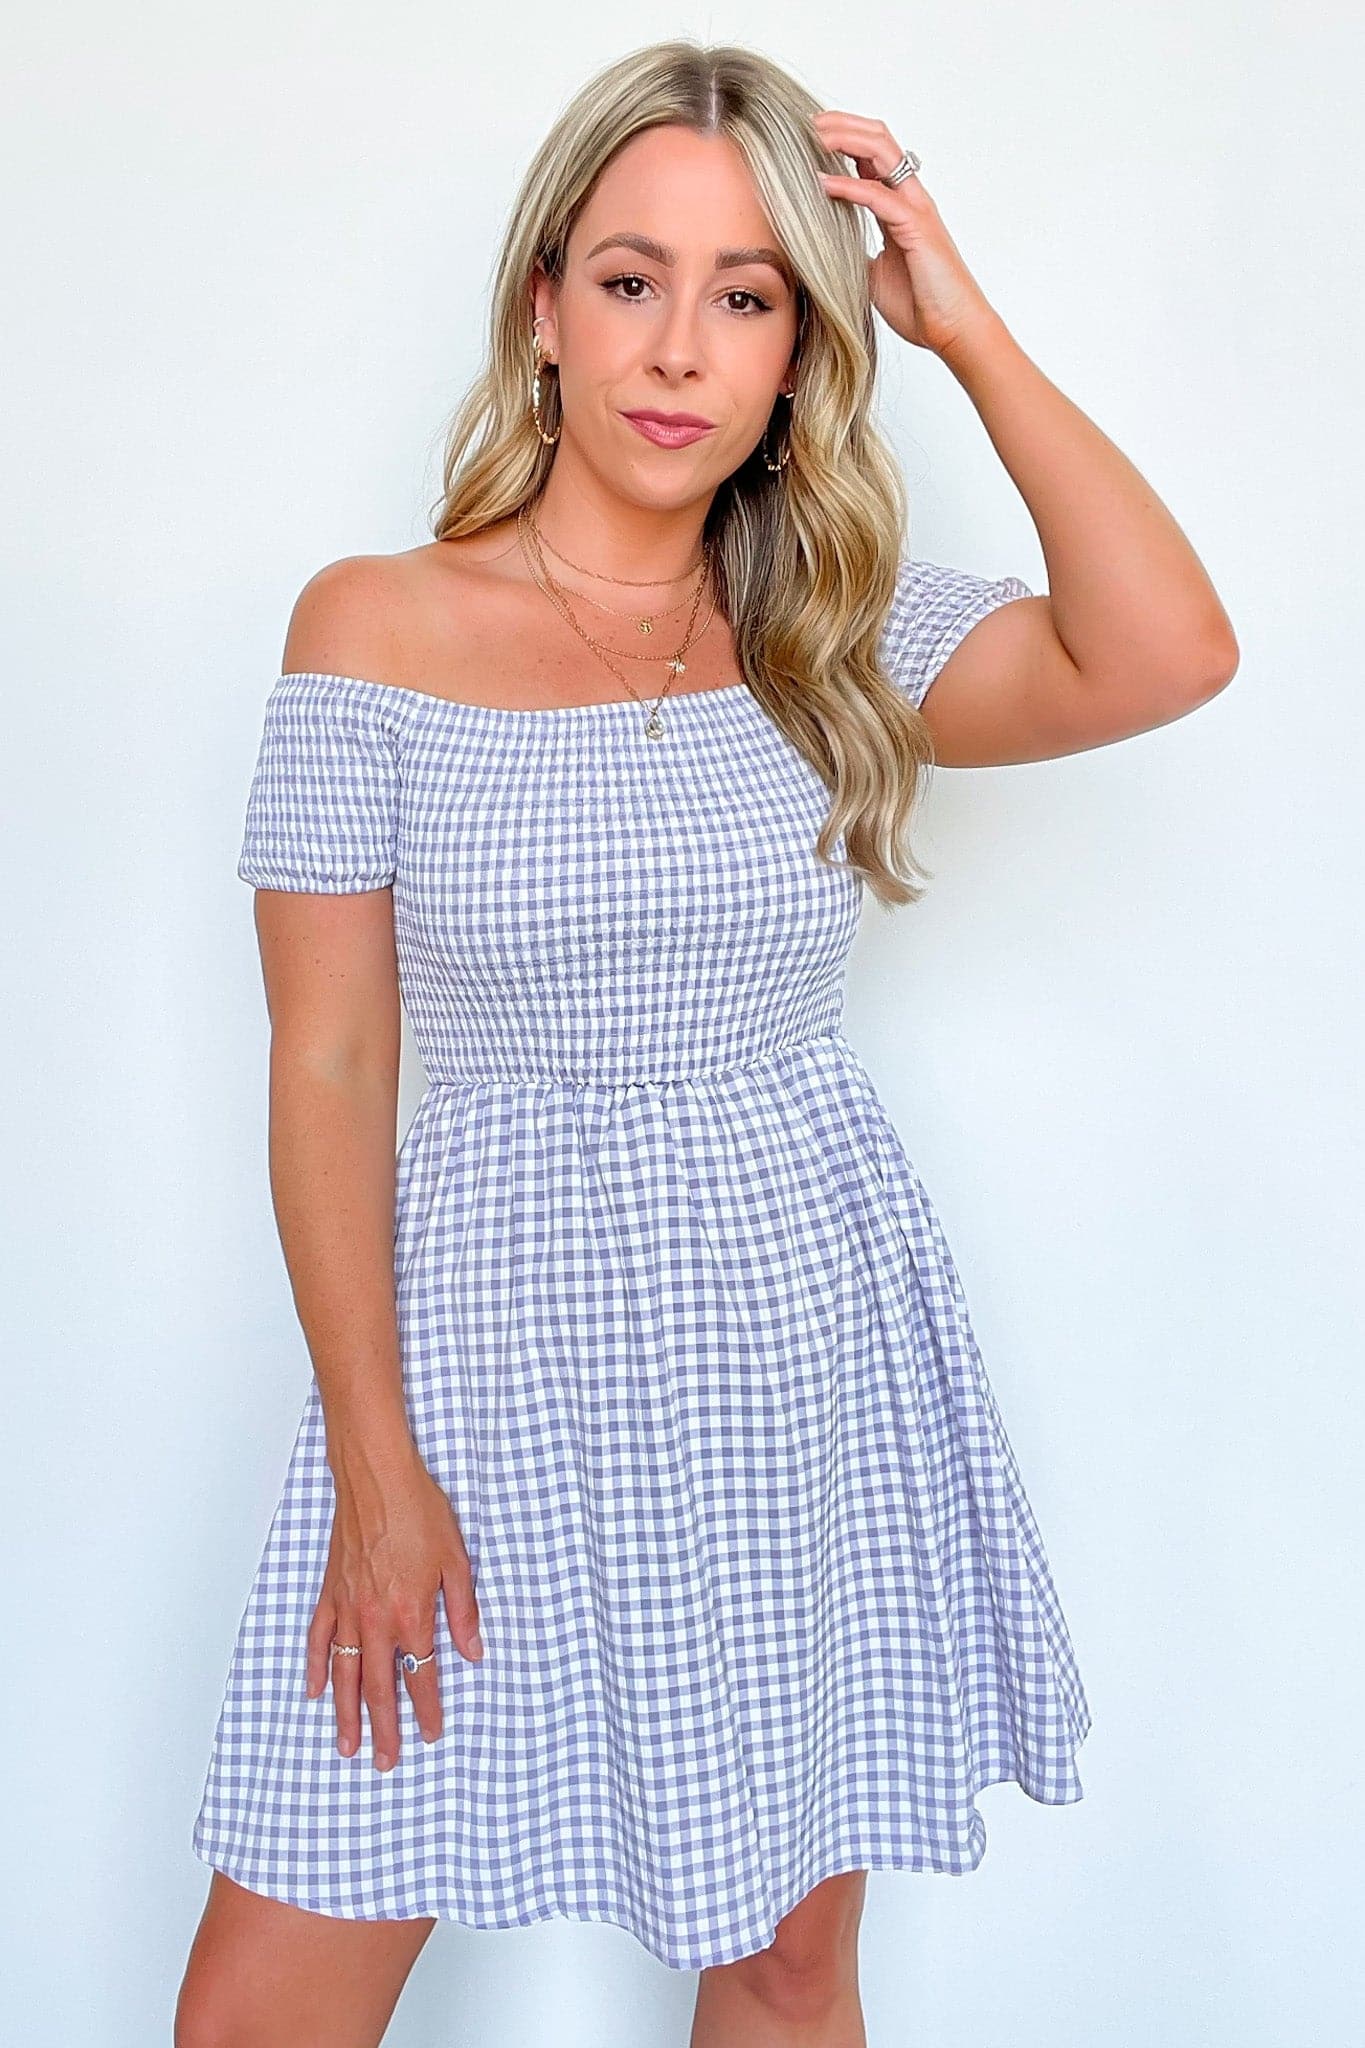  Perfect Day Off Shoulder Gingham Dress - FINAL SALE - Madison and Mallory